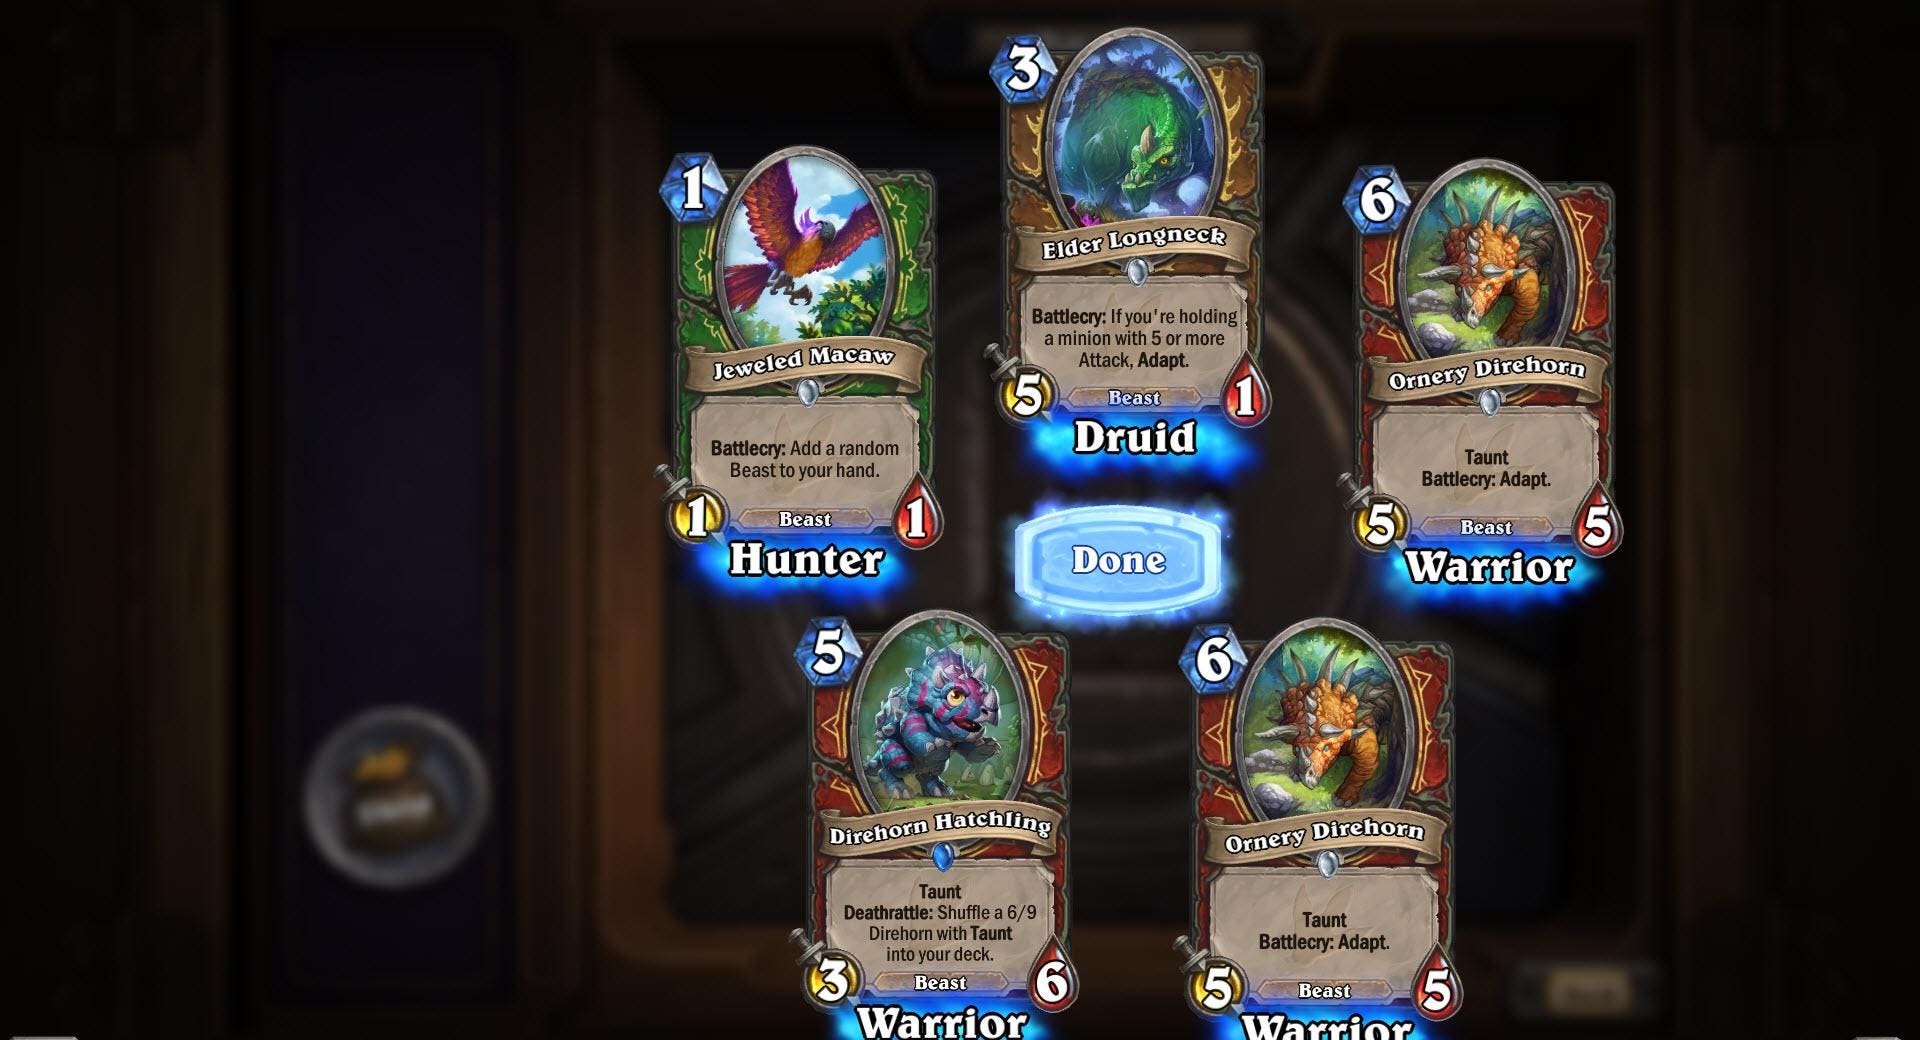 How to collect every Hearthstone card you need (While saving cash and gold) - Polygon